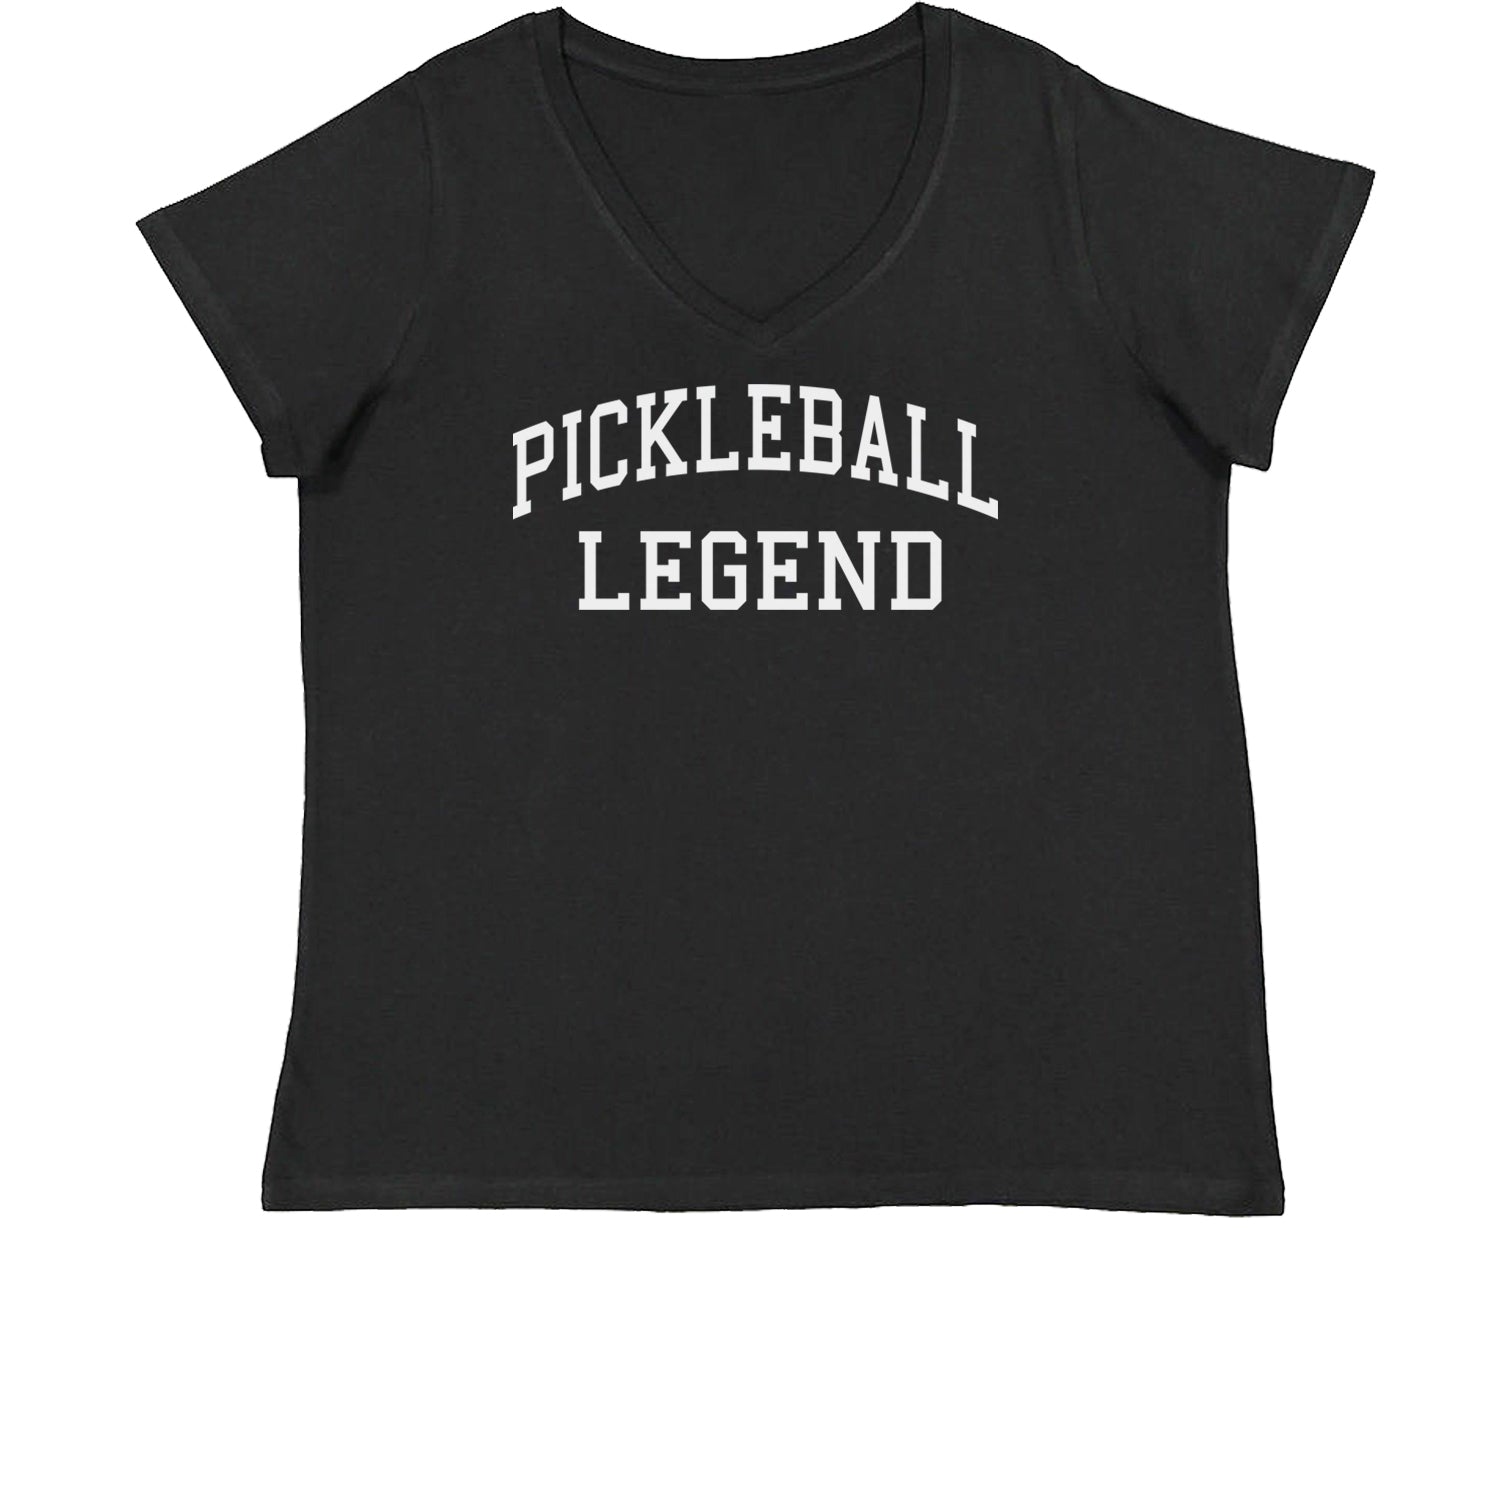 Pickleball Legend Womens Plus Size V-Neck T-shirt ball, dink, dinking, pickle, pickleball by Expression Tees